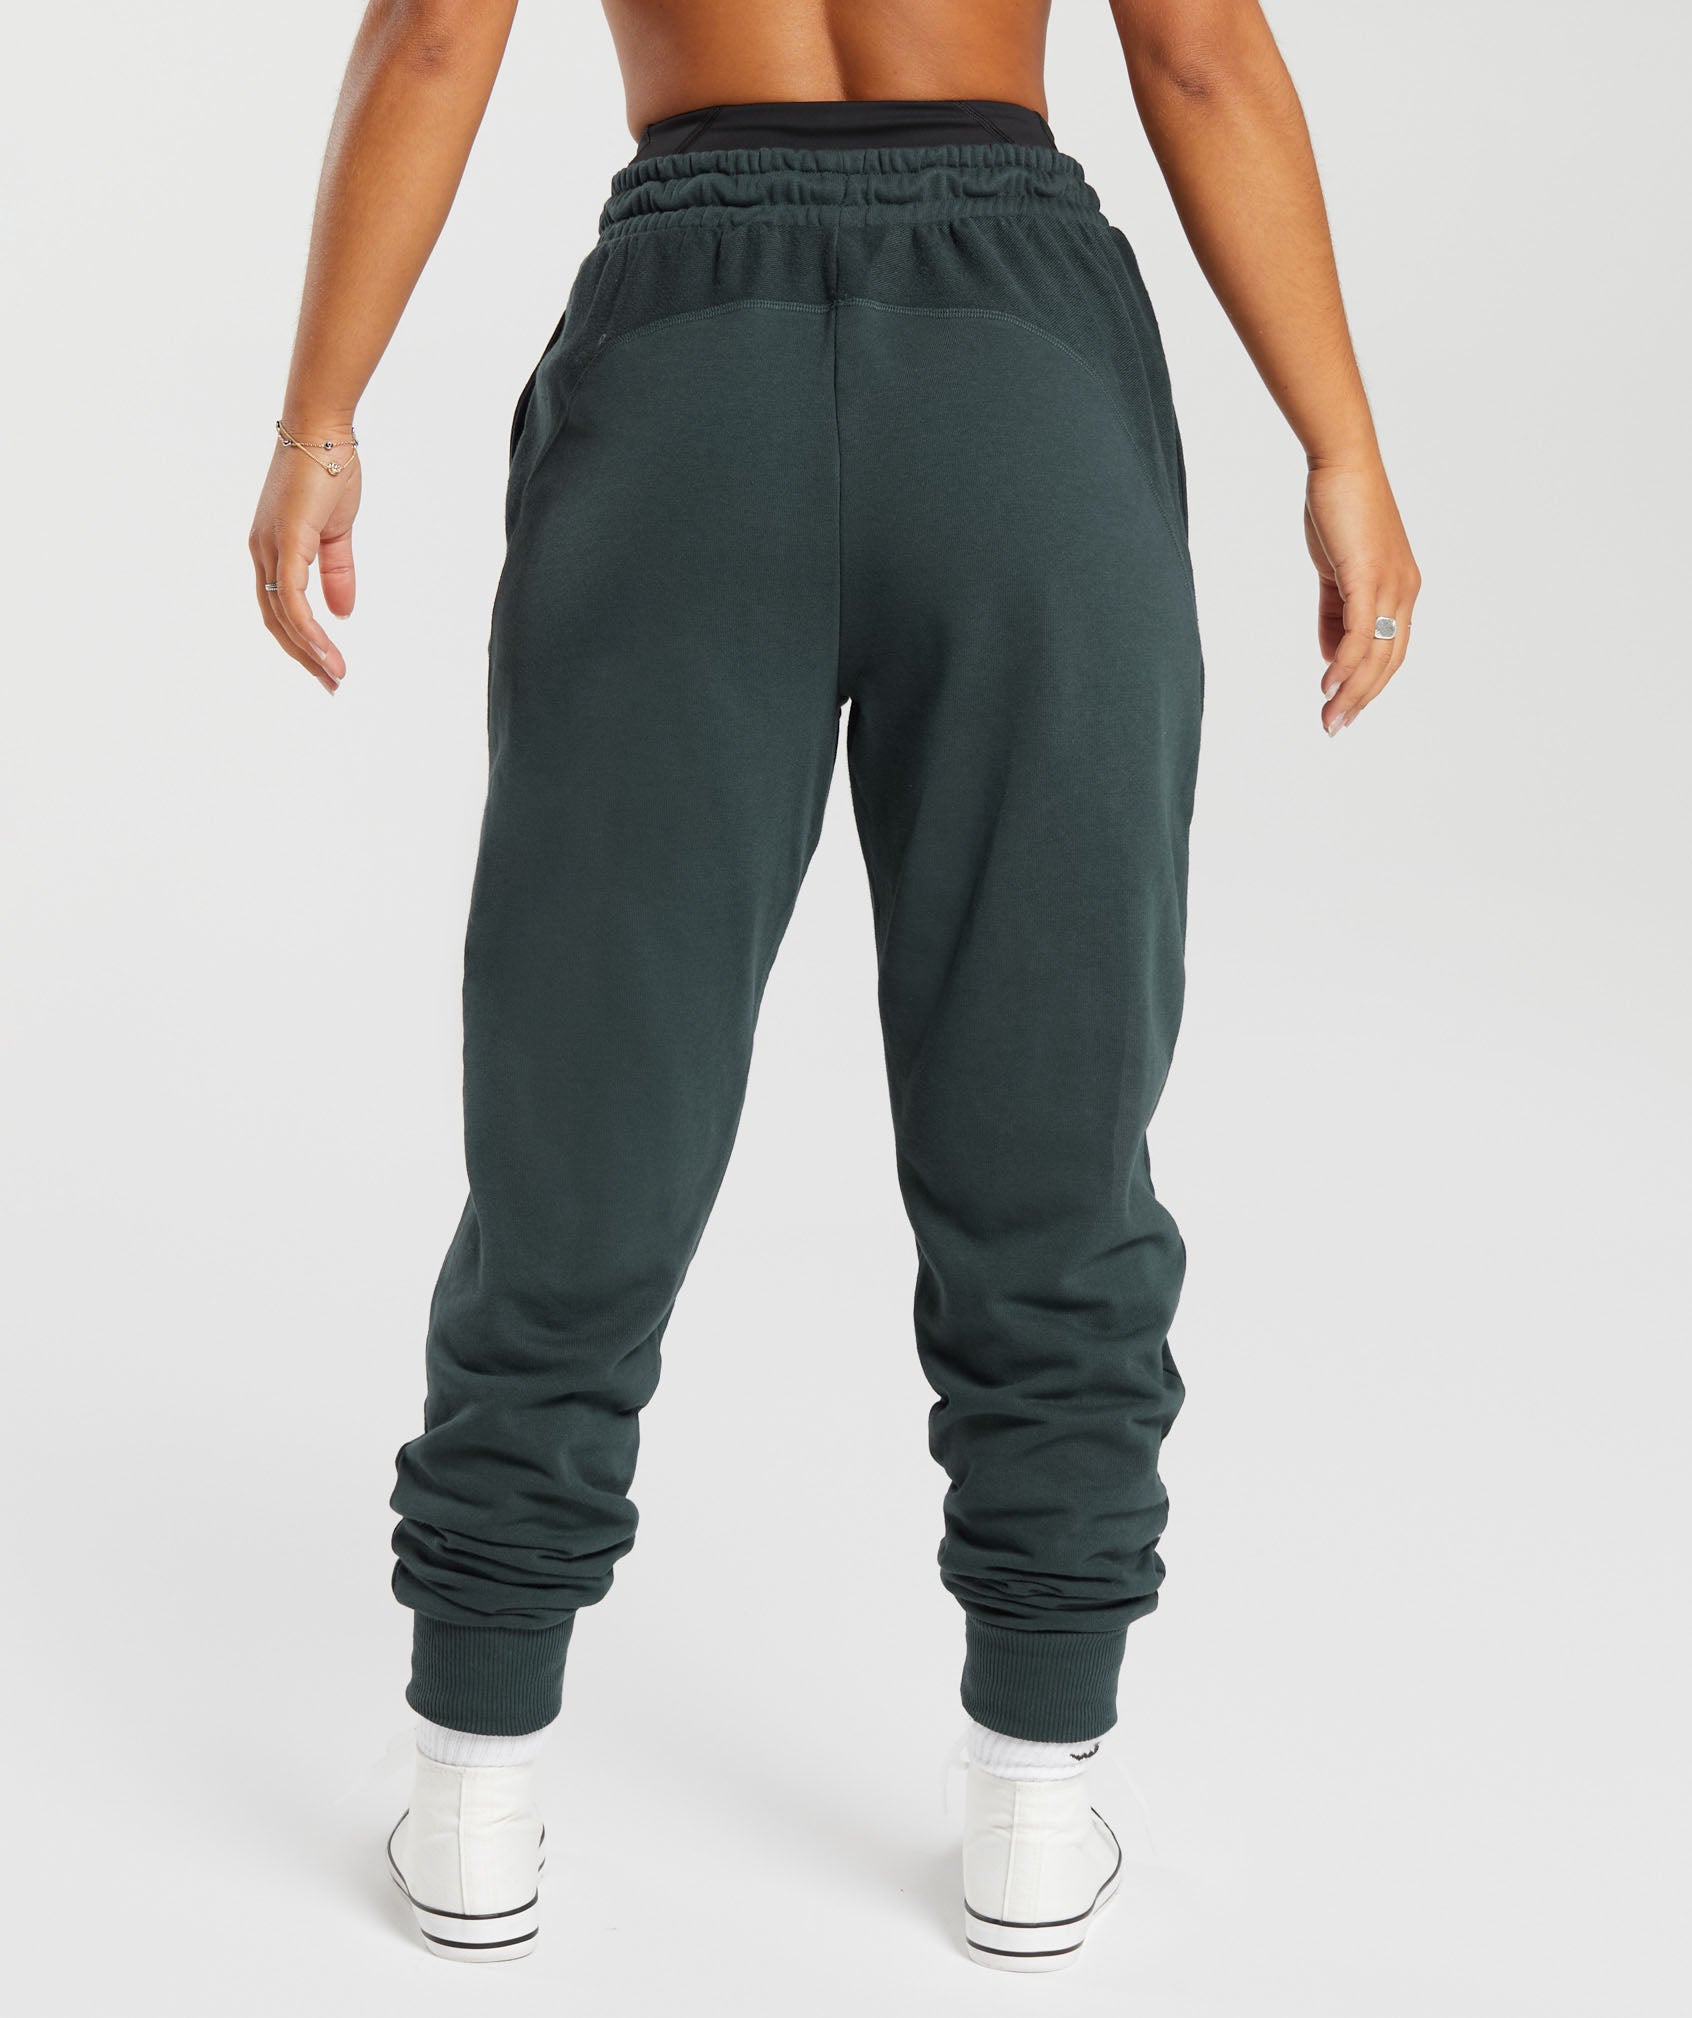 GS Power Joggers in Teal - view 2